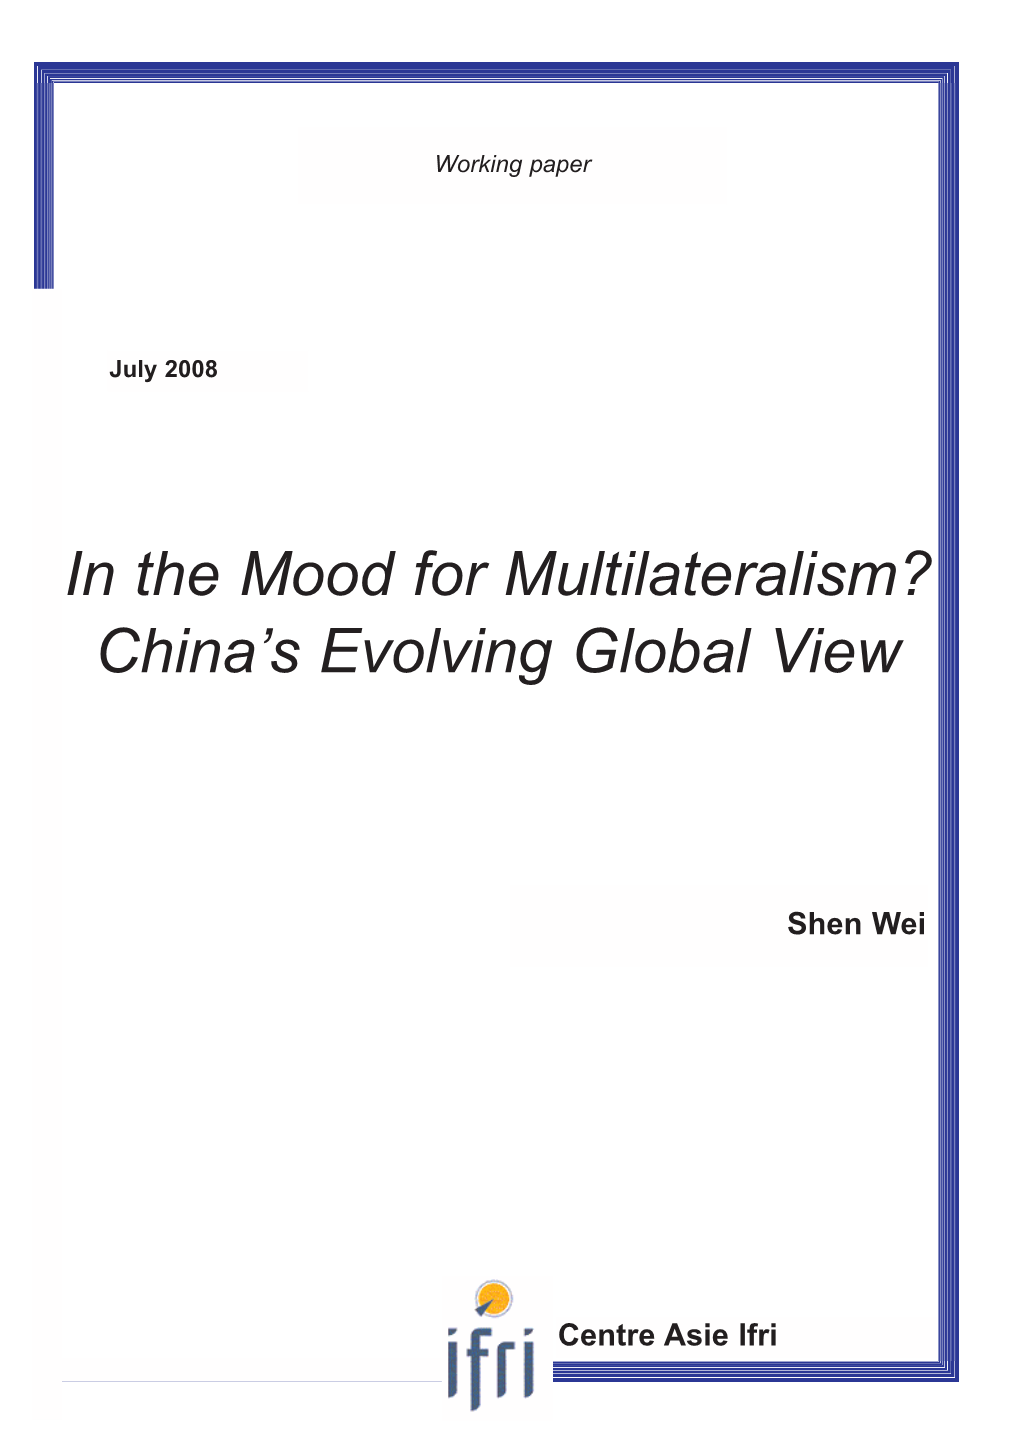 In the Mood for Multilateralism? China's Evolving Global View